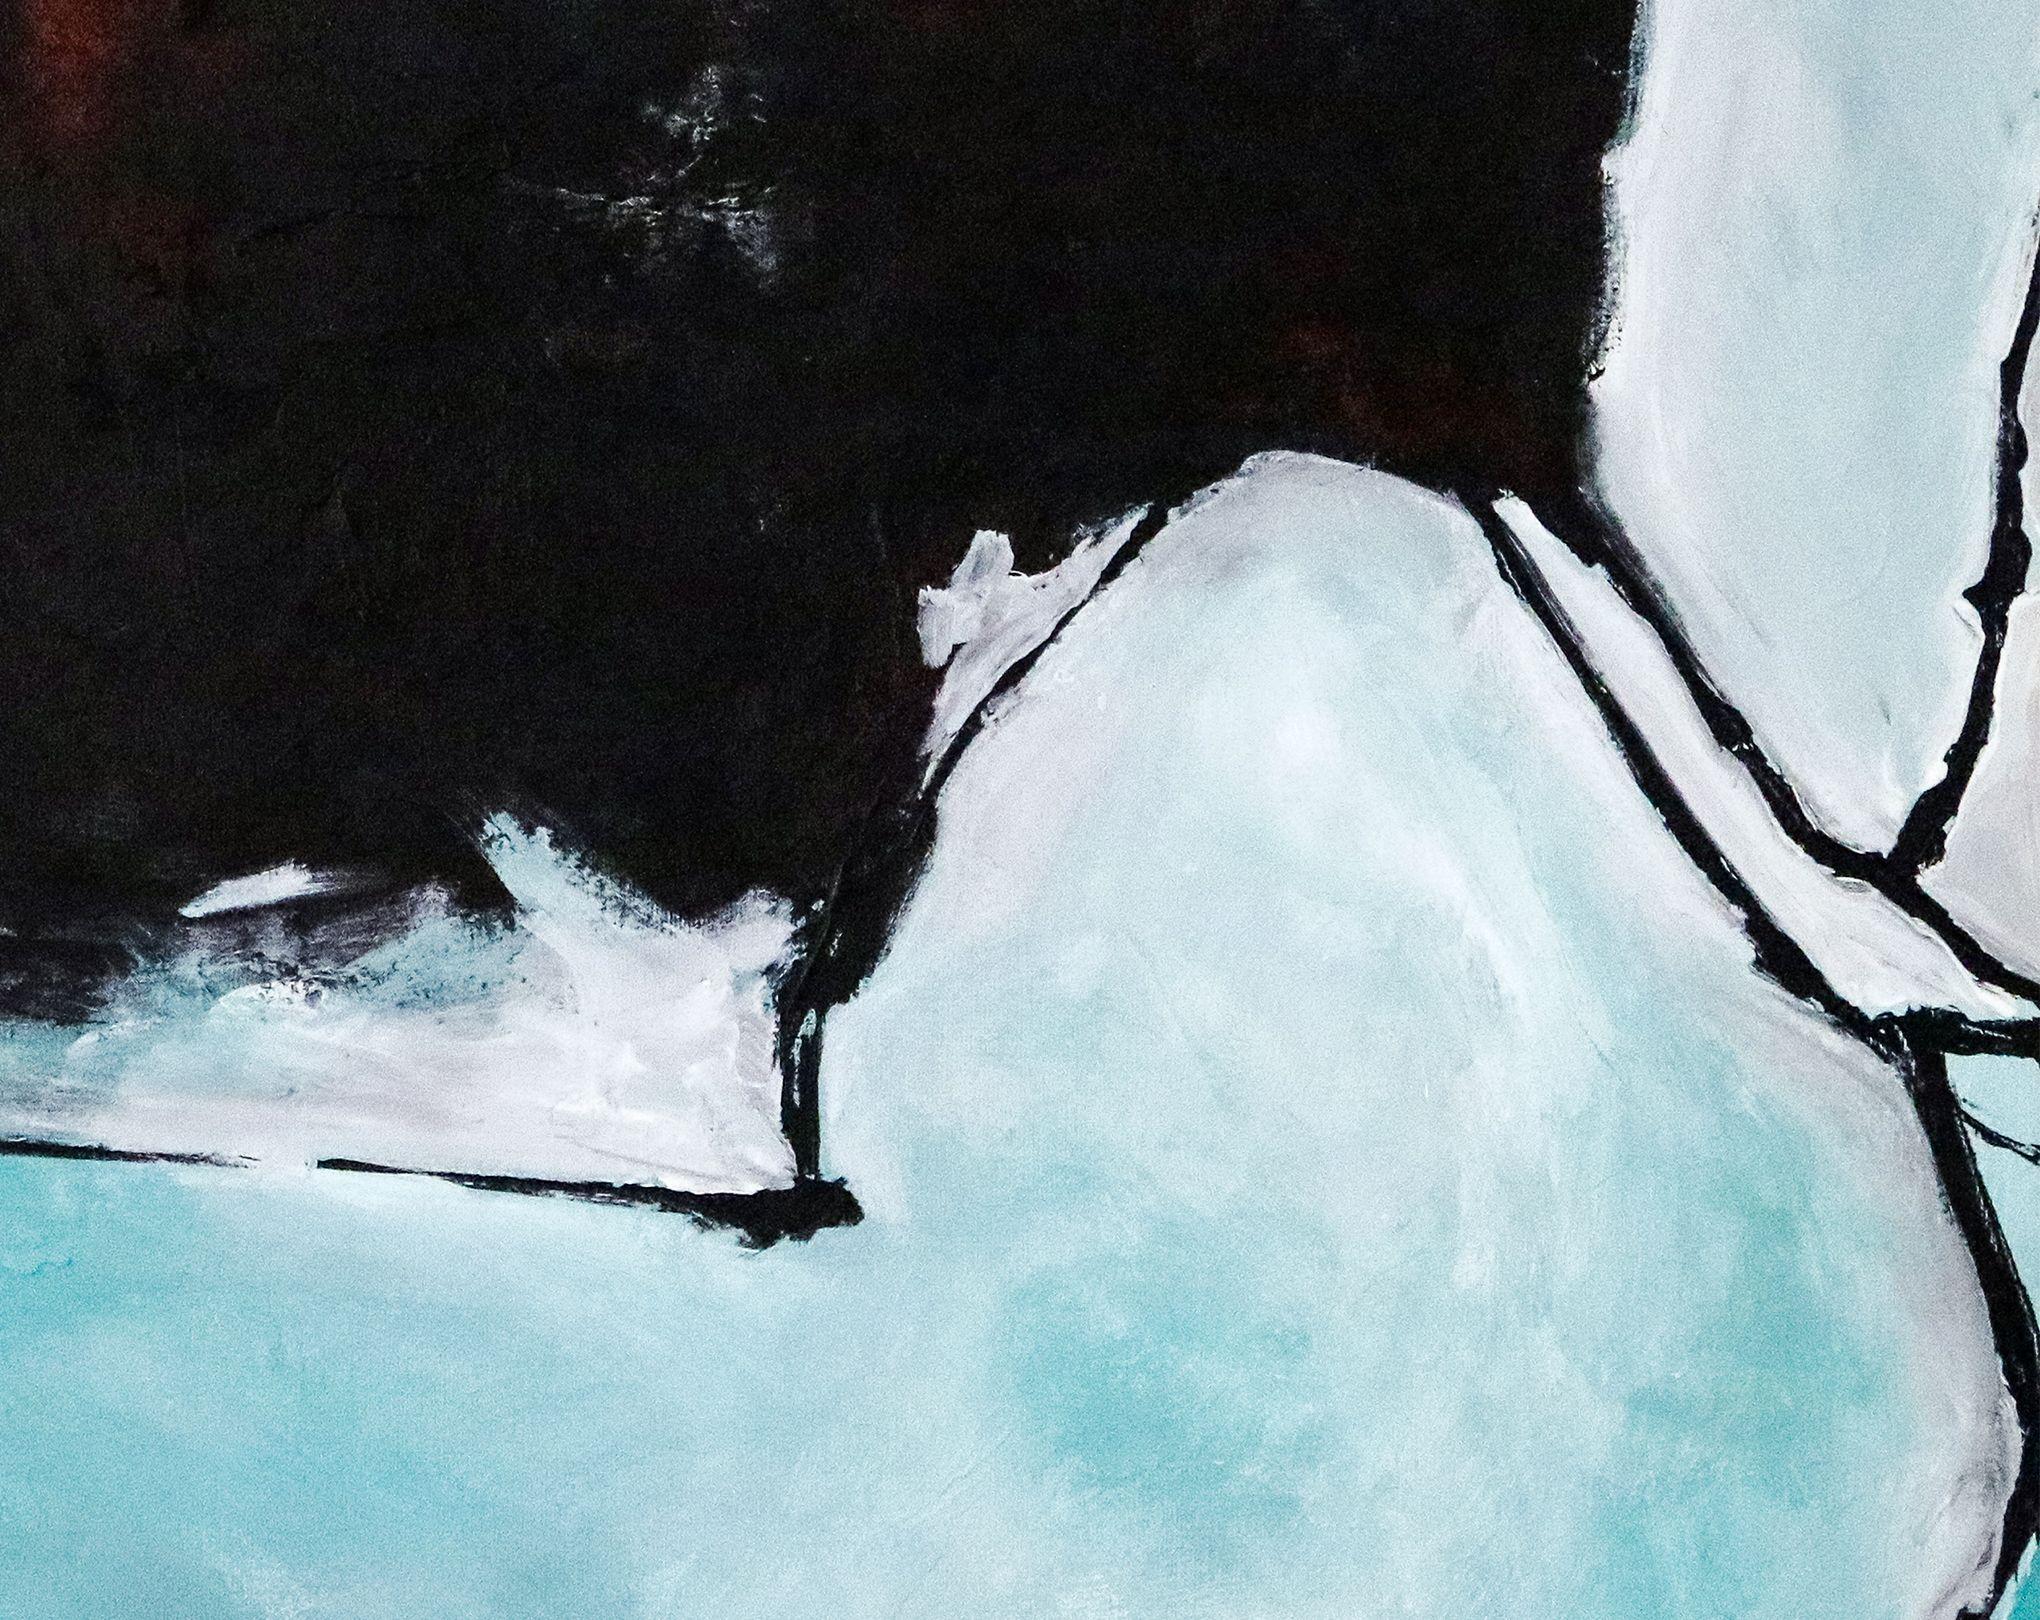 An abstract expressionism, acrylic painting on canvas, colors of black, white and turquoise. â€¢ PICTURE HANGER ATTACHED: Yes â€¢ SIDES PAINTED: Yes â€¢ READY TO HANG: Yes â€¢ ARTIST SIGNED: Yes â€¢ CERTIFICATE OF AUTHENTICITY: Yes, This is an